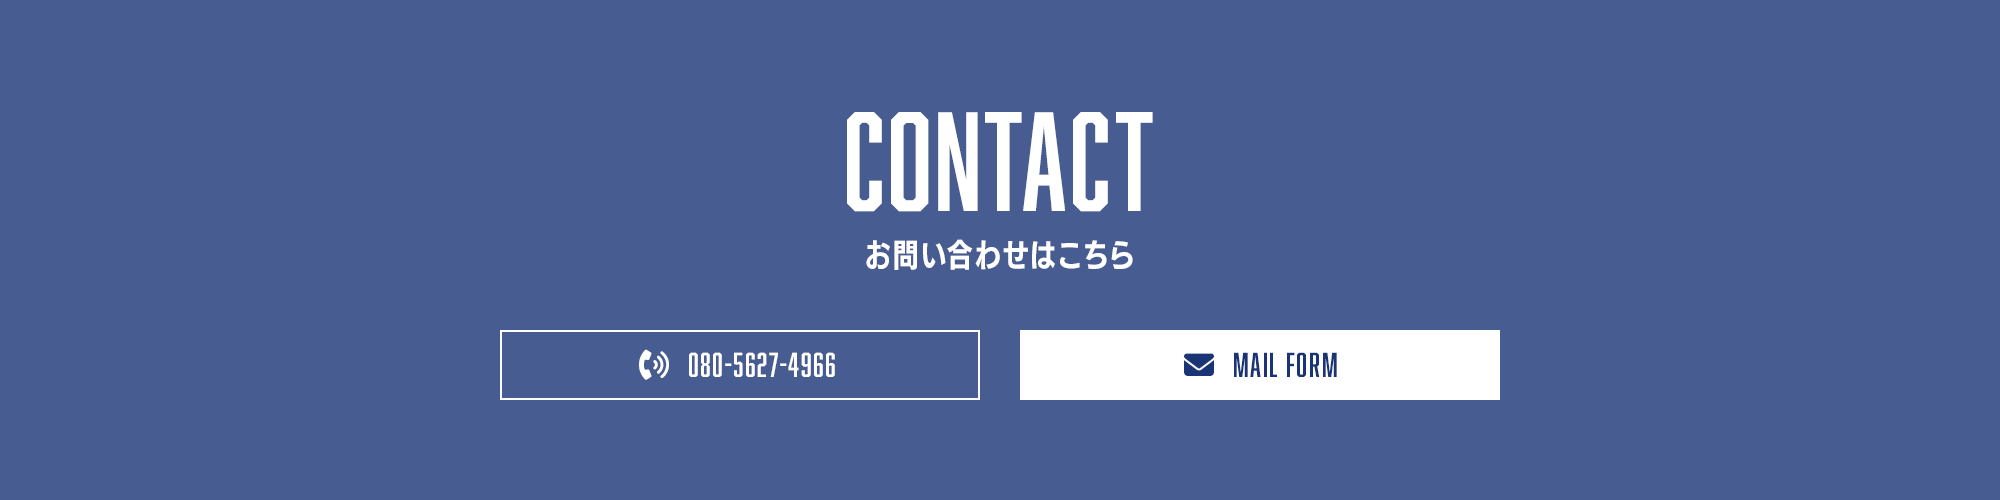 bnr_contact_on